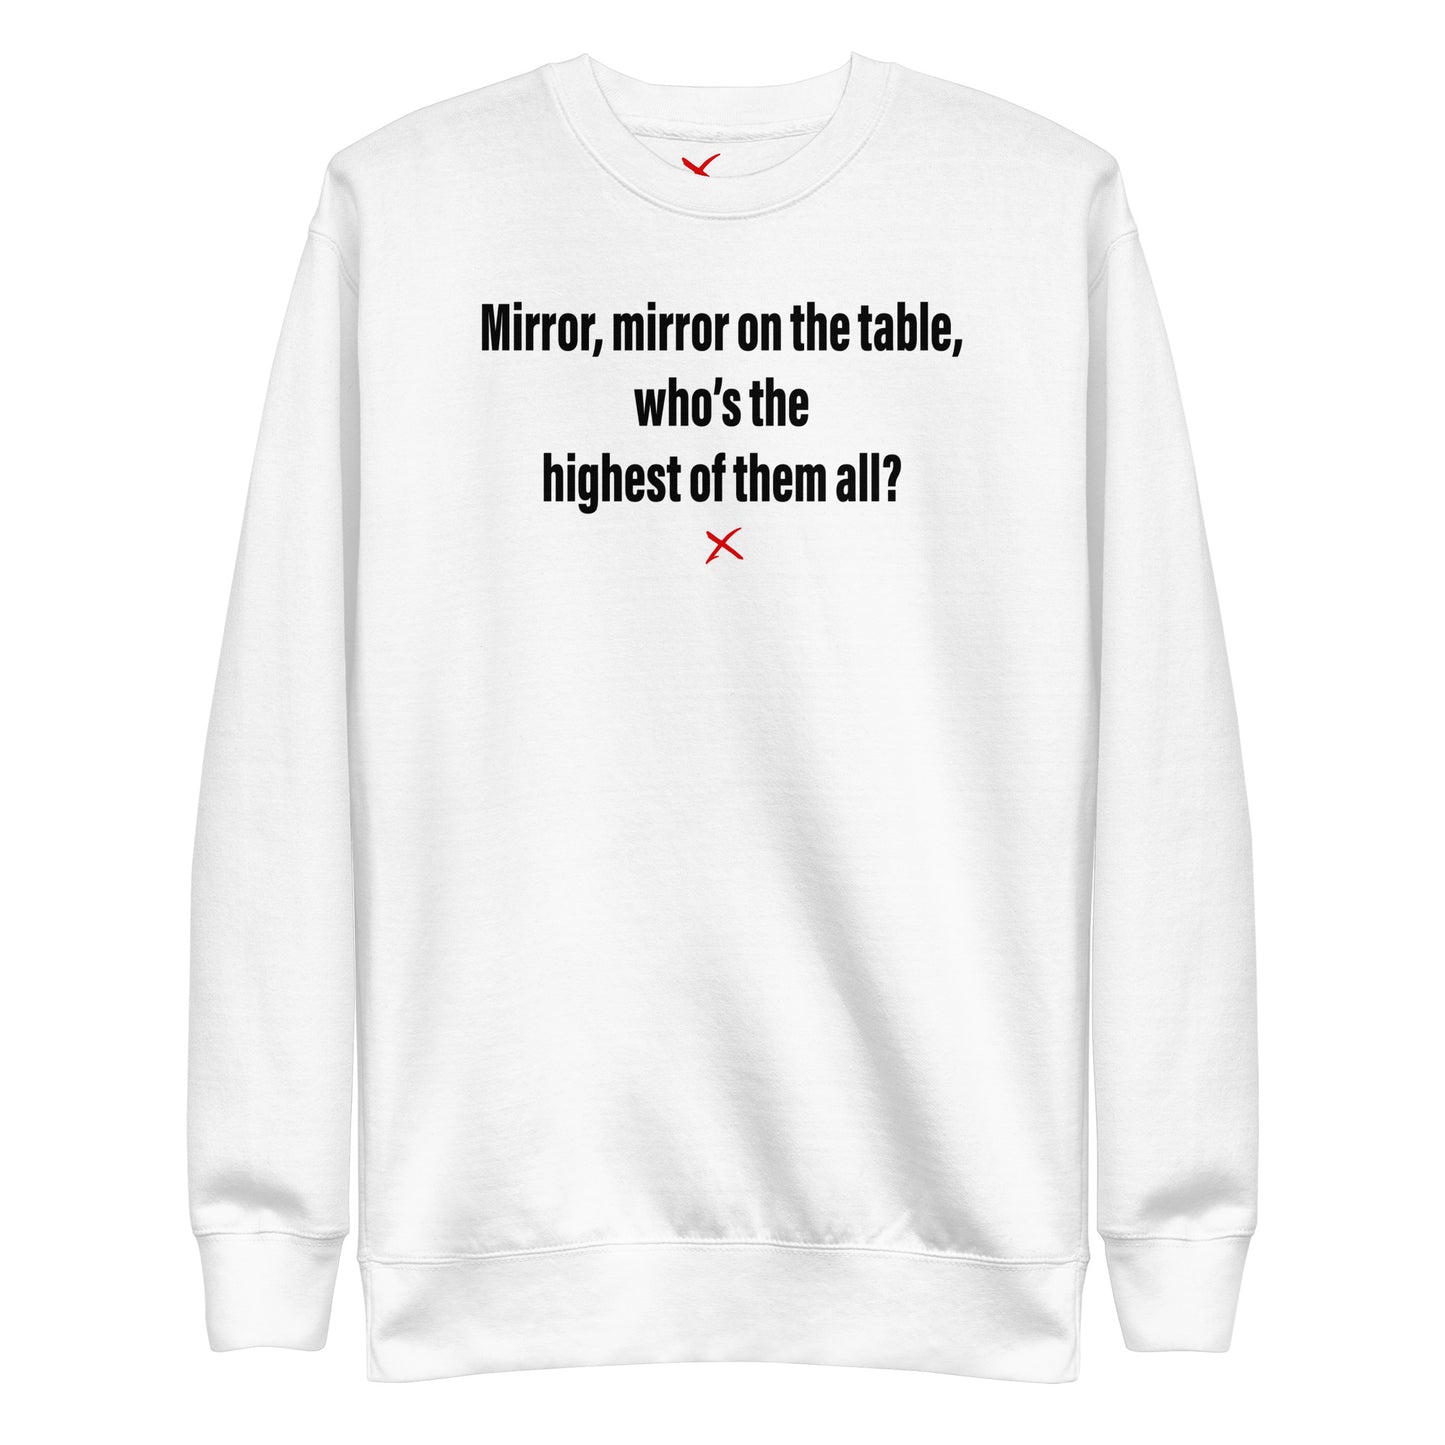 Mirror, mirror on the table, who's the highest of them all? - Sweatshirt